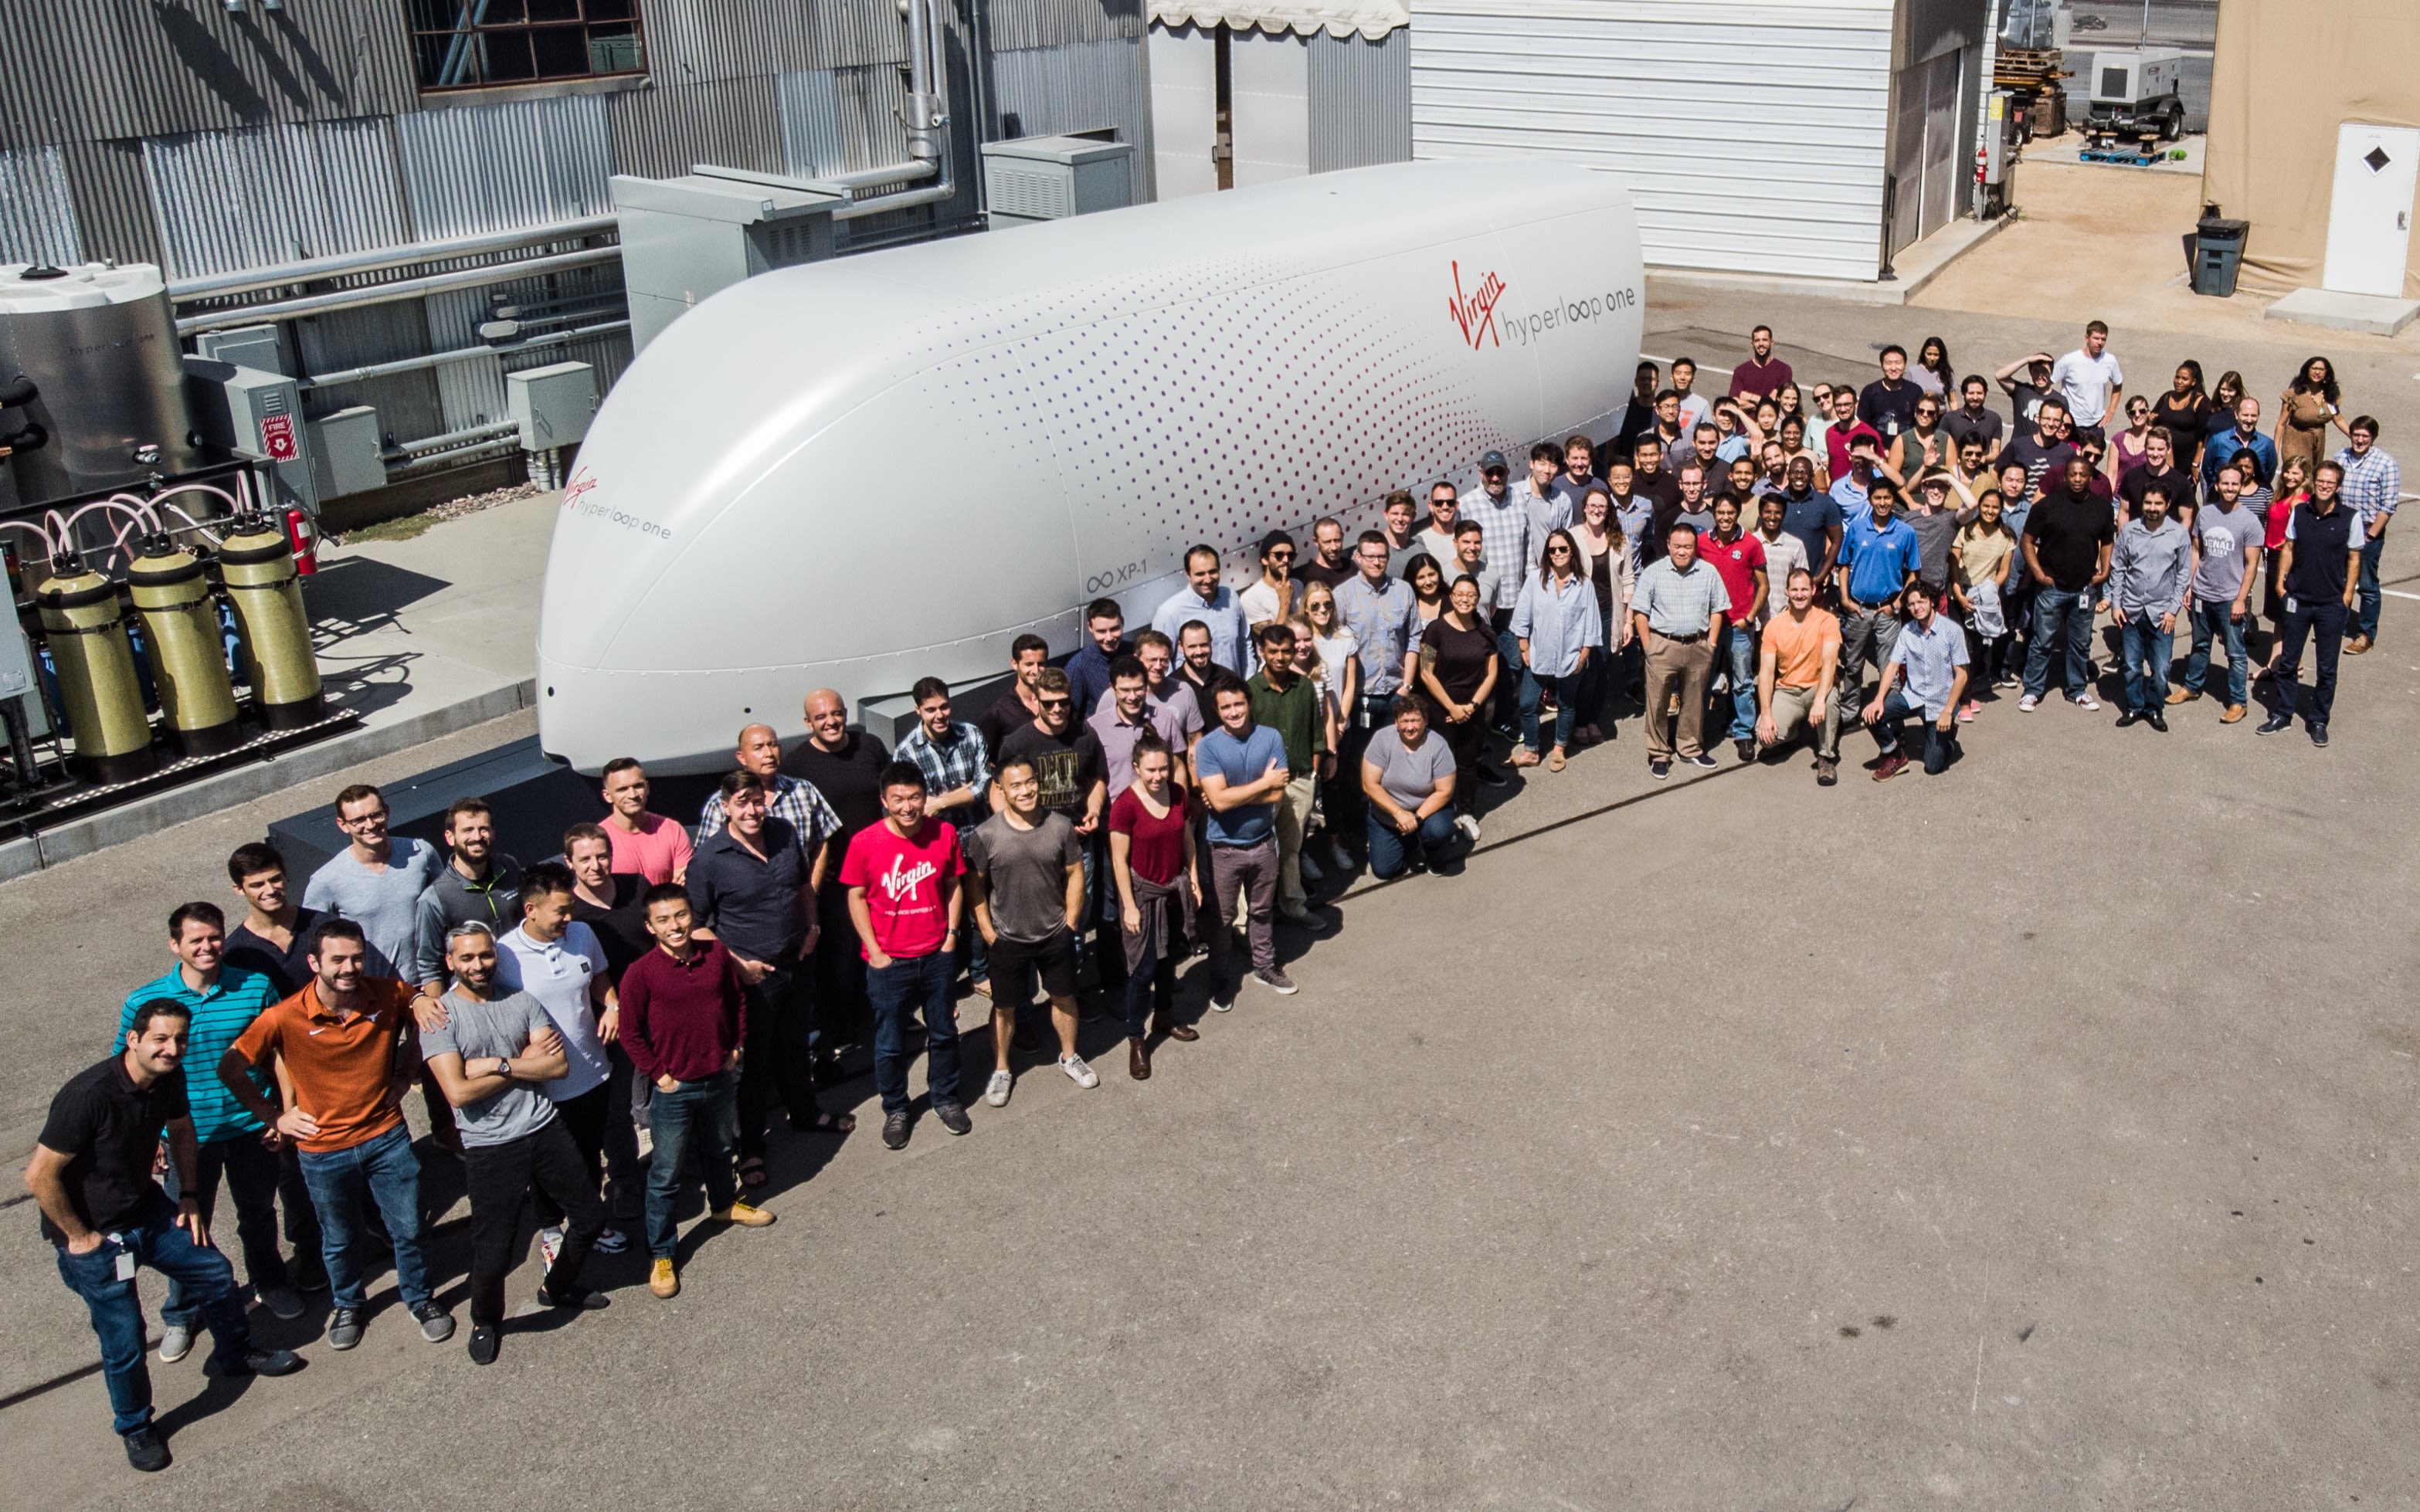 The Virgin Hyperloop team stand in front of the XP-1 pod